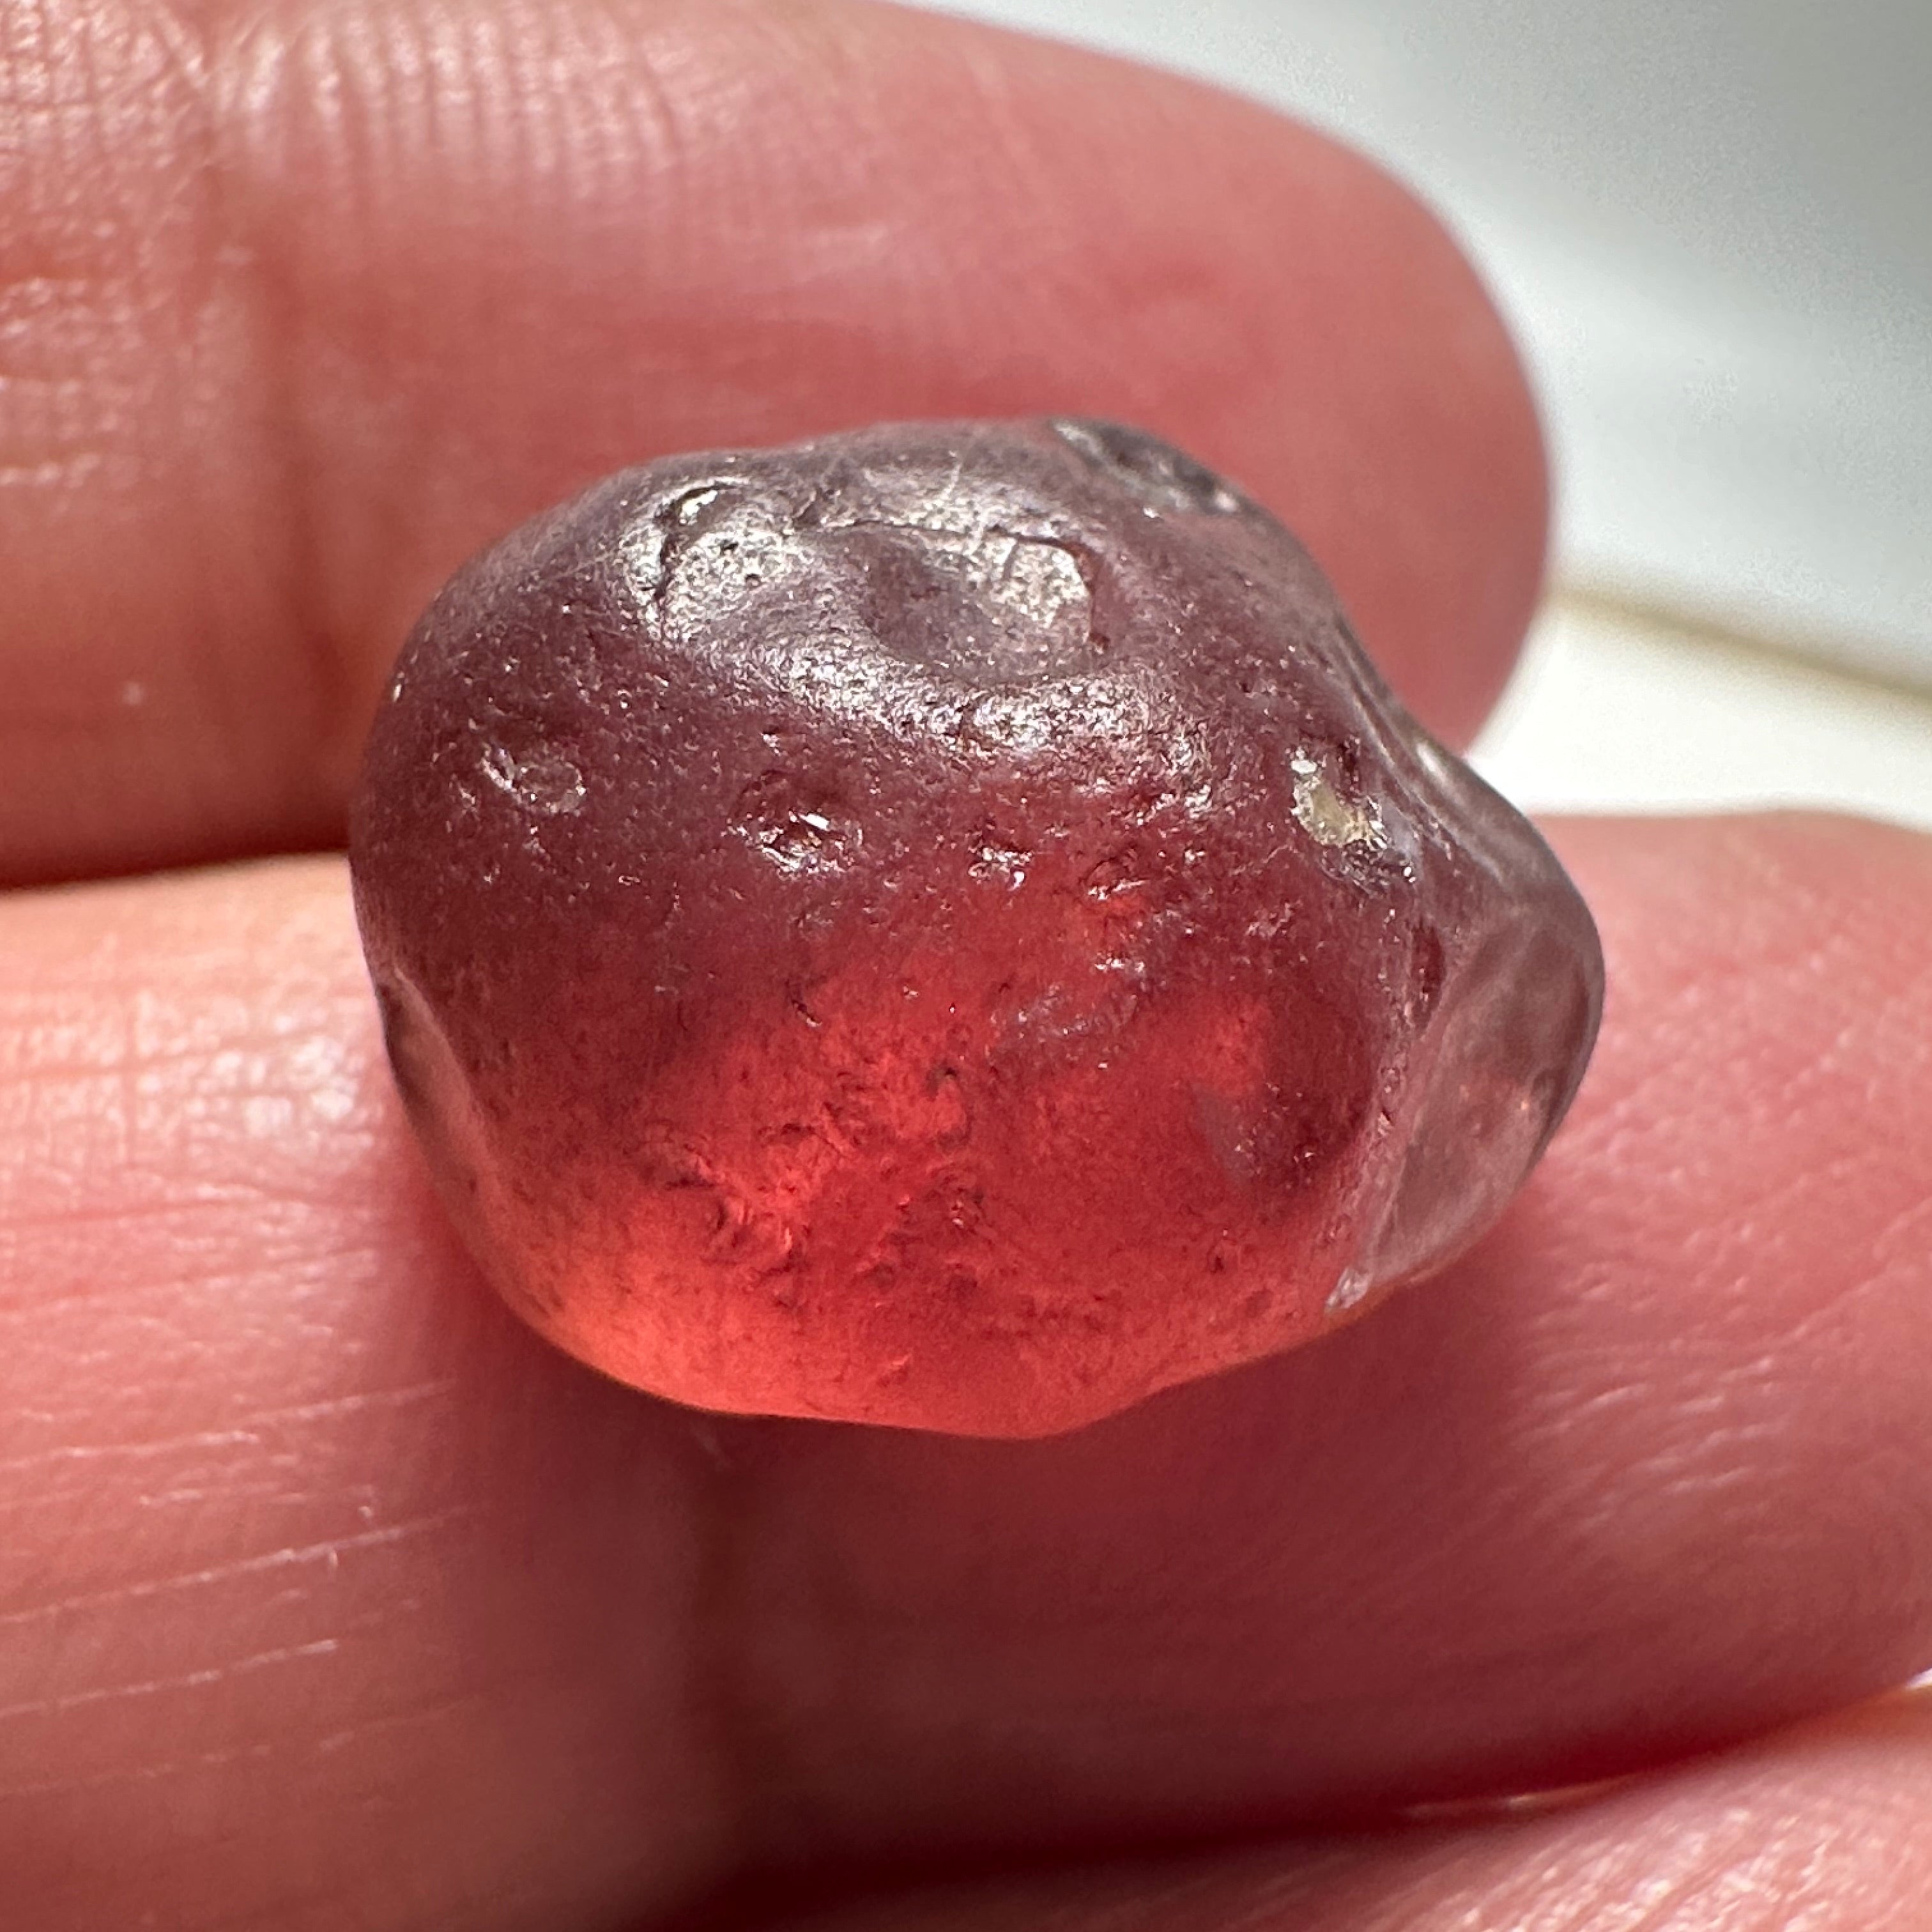 21.25ct Colour shift Garnet, Umba Valley, Tanzania, Untreated Unheated. 2 tiny white spots and silk in the stone. See the video where it shows a window into the side for positioning of the 2 spots